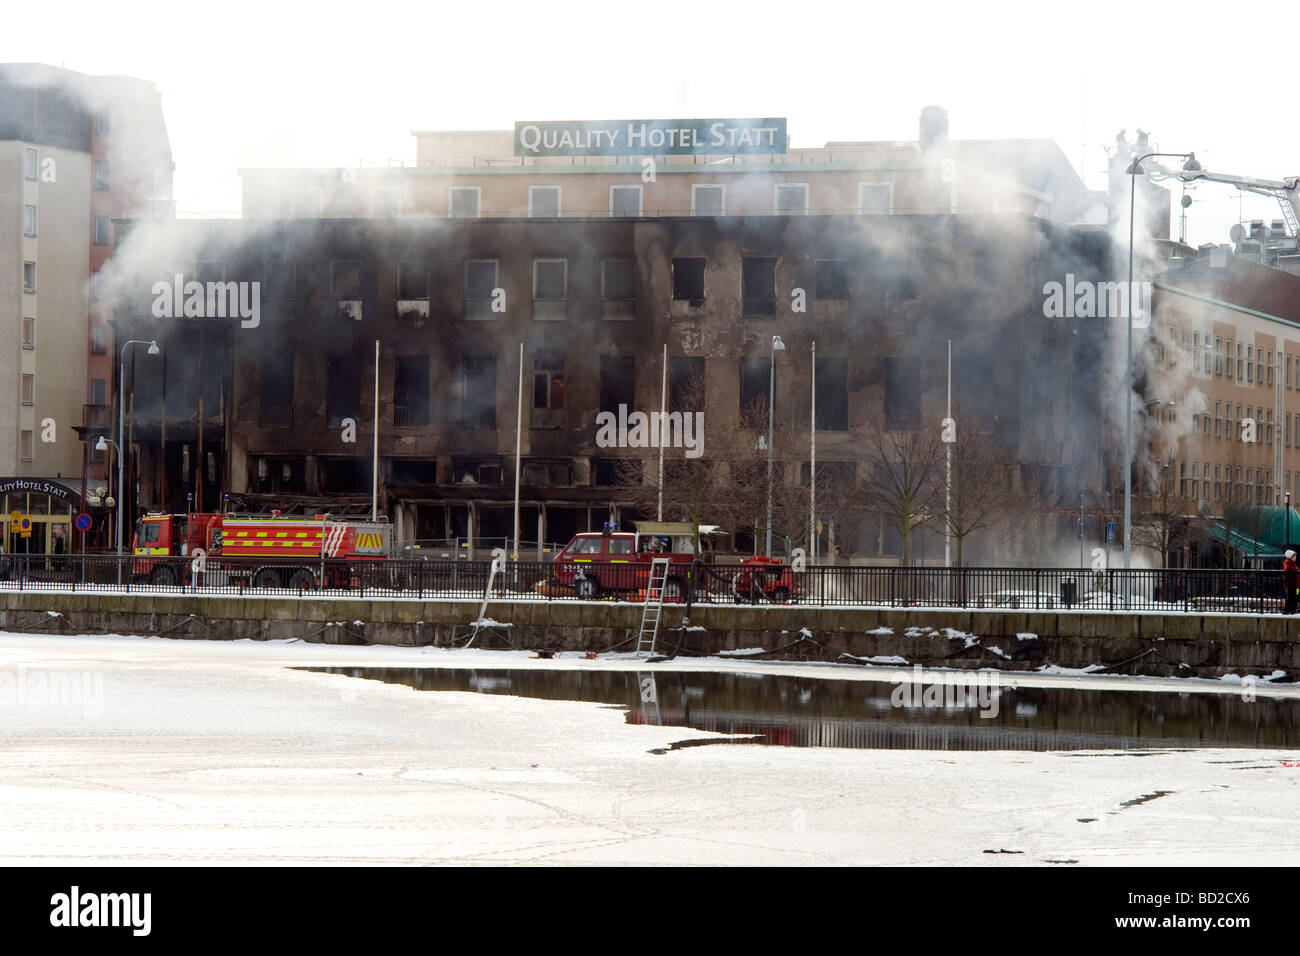 Hotel Cought durch Feuer Stockfoto